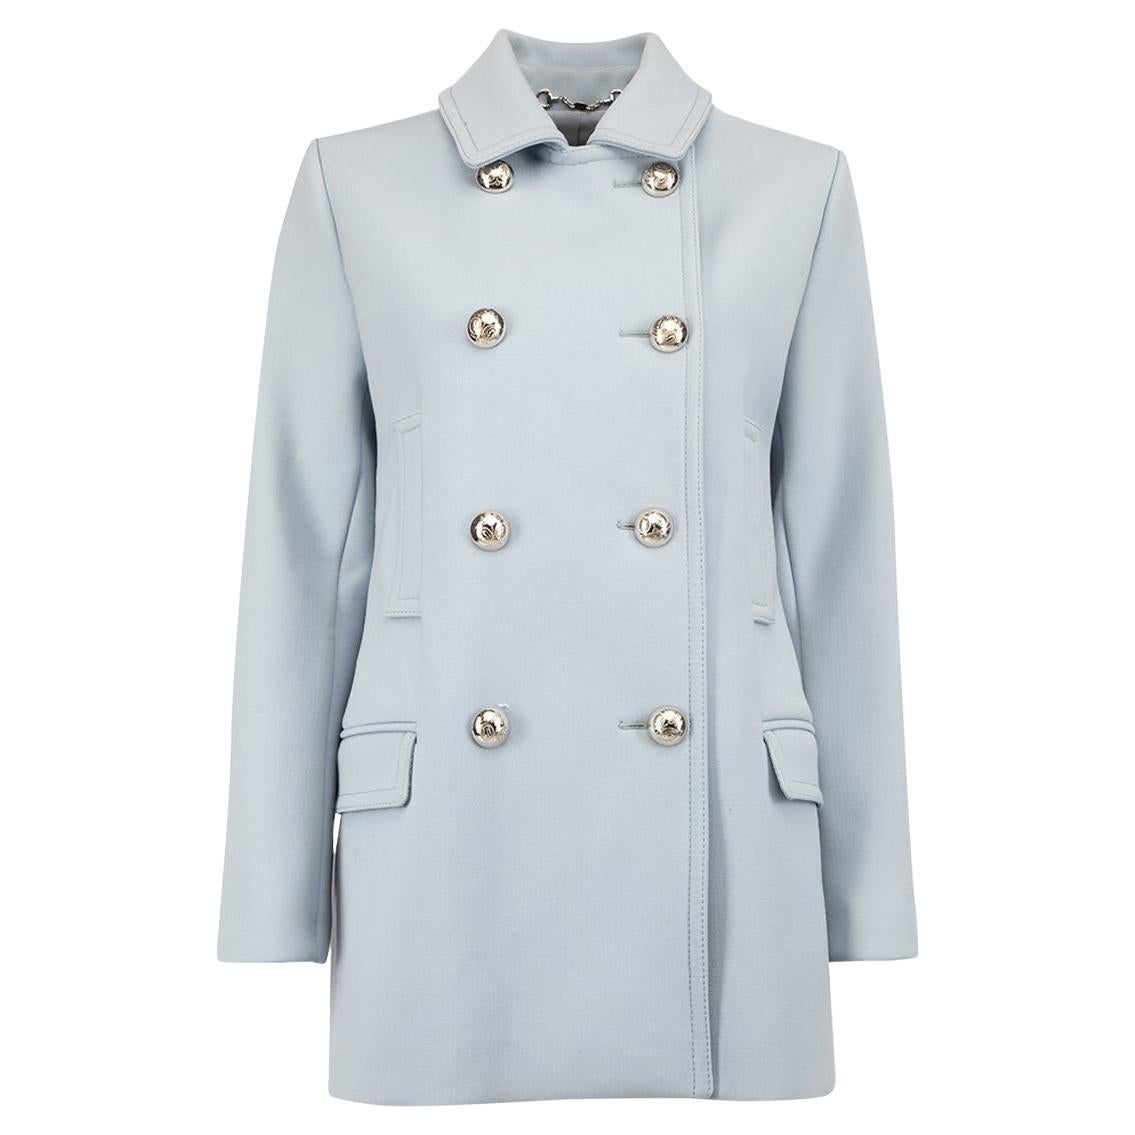 Pre-Loved Gucci Women's Light Blue Wool Double Breasted Coat